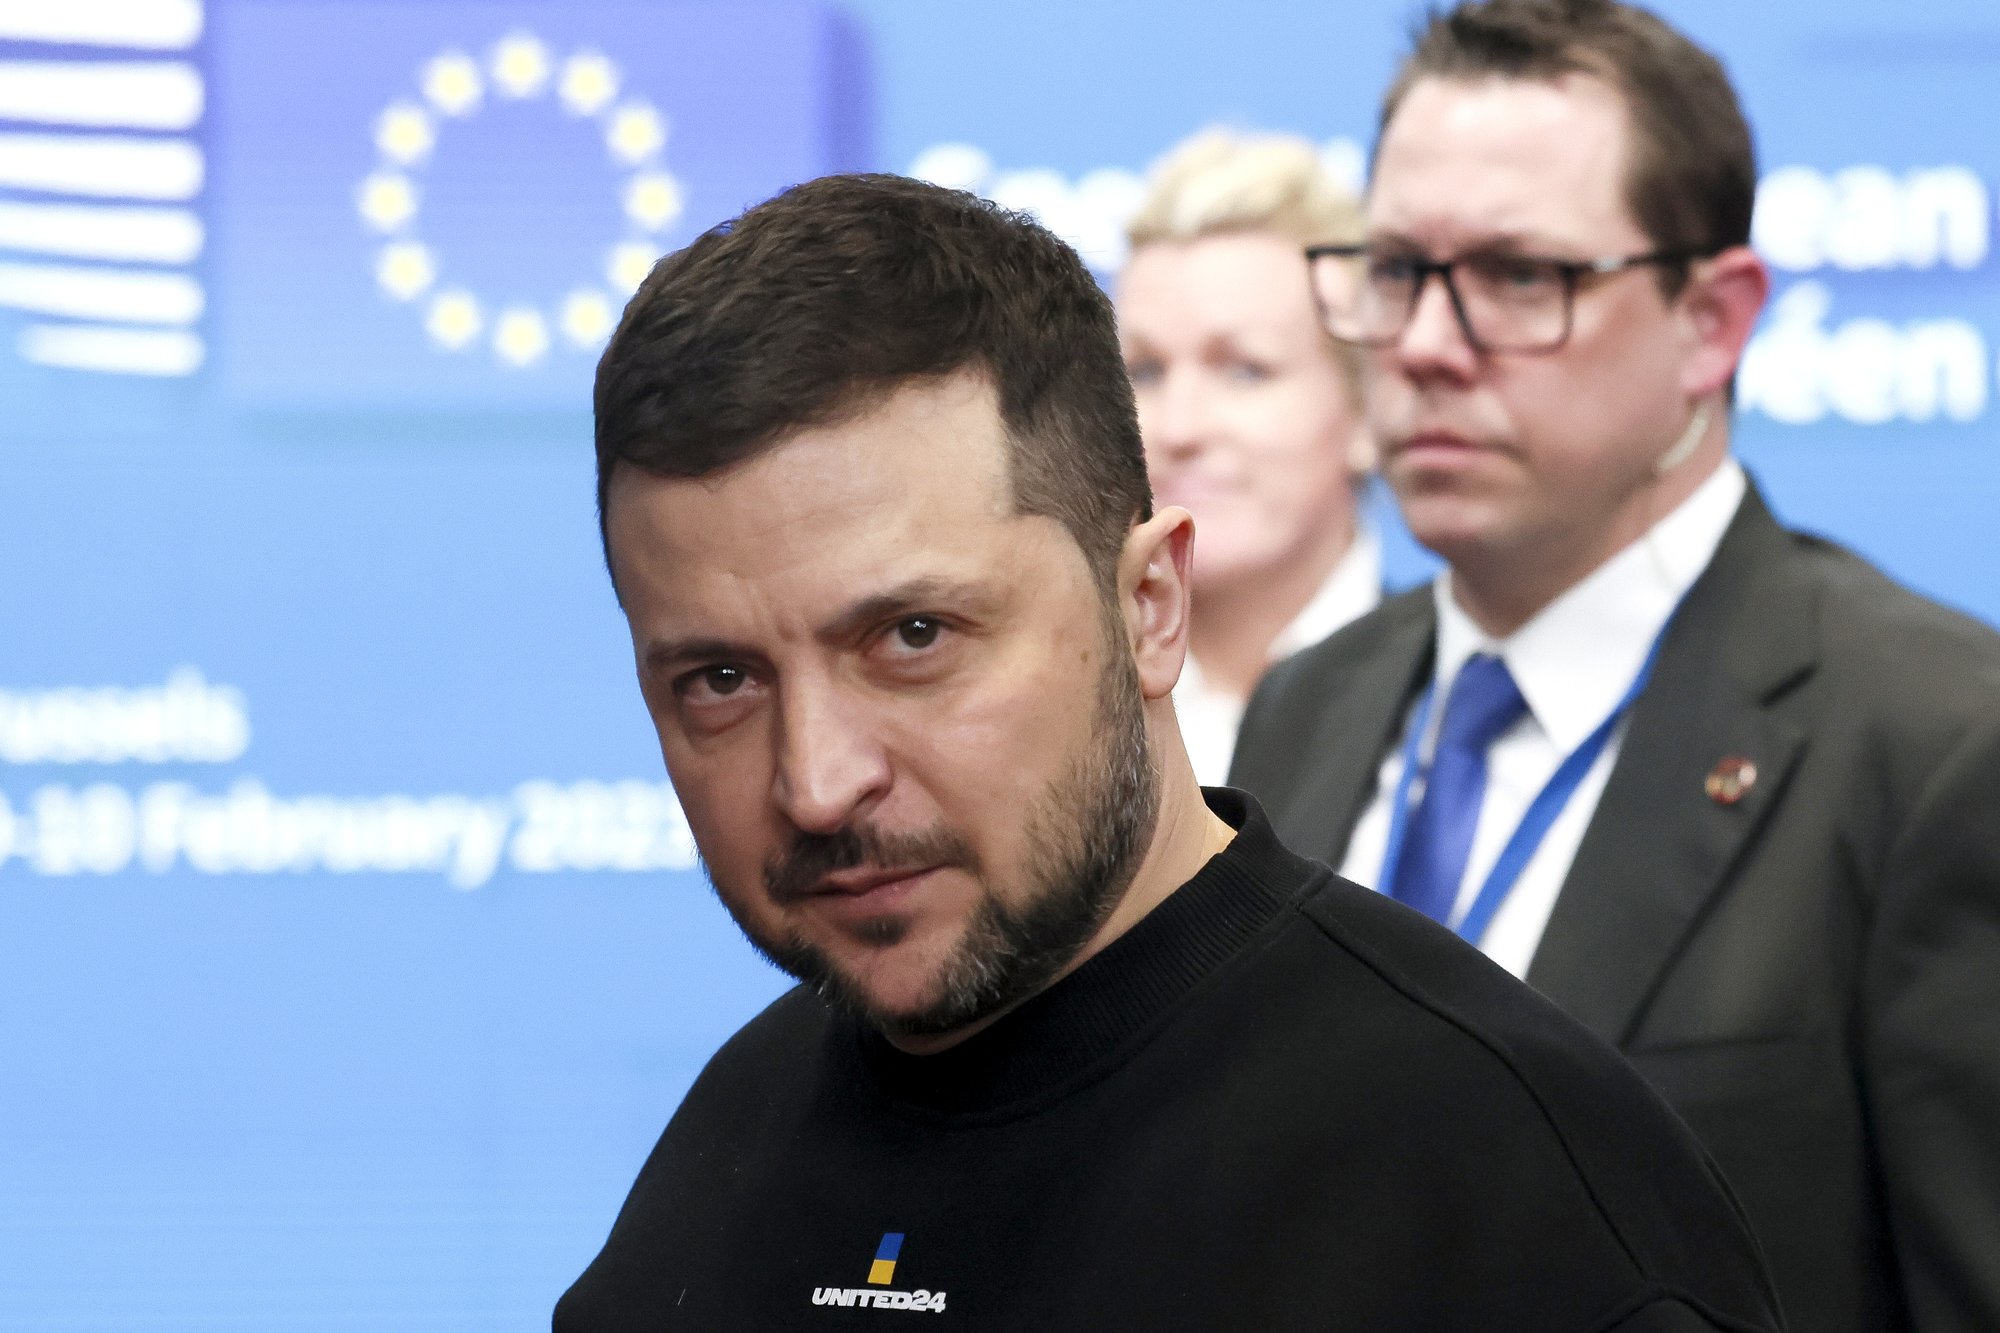 Ukraine's President Volodymyr Zelenskyy, left, leaves after meeting European Union leaders at an EU summit in Brussels on Thursday, Feb. 9, 2023. European Union leaders are meeting for an EU summit on Thursday to discuss Ukraine and migration. (Yves Herman, Pool Photo via AP)